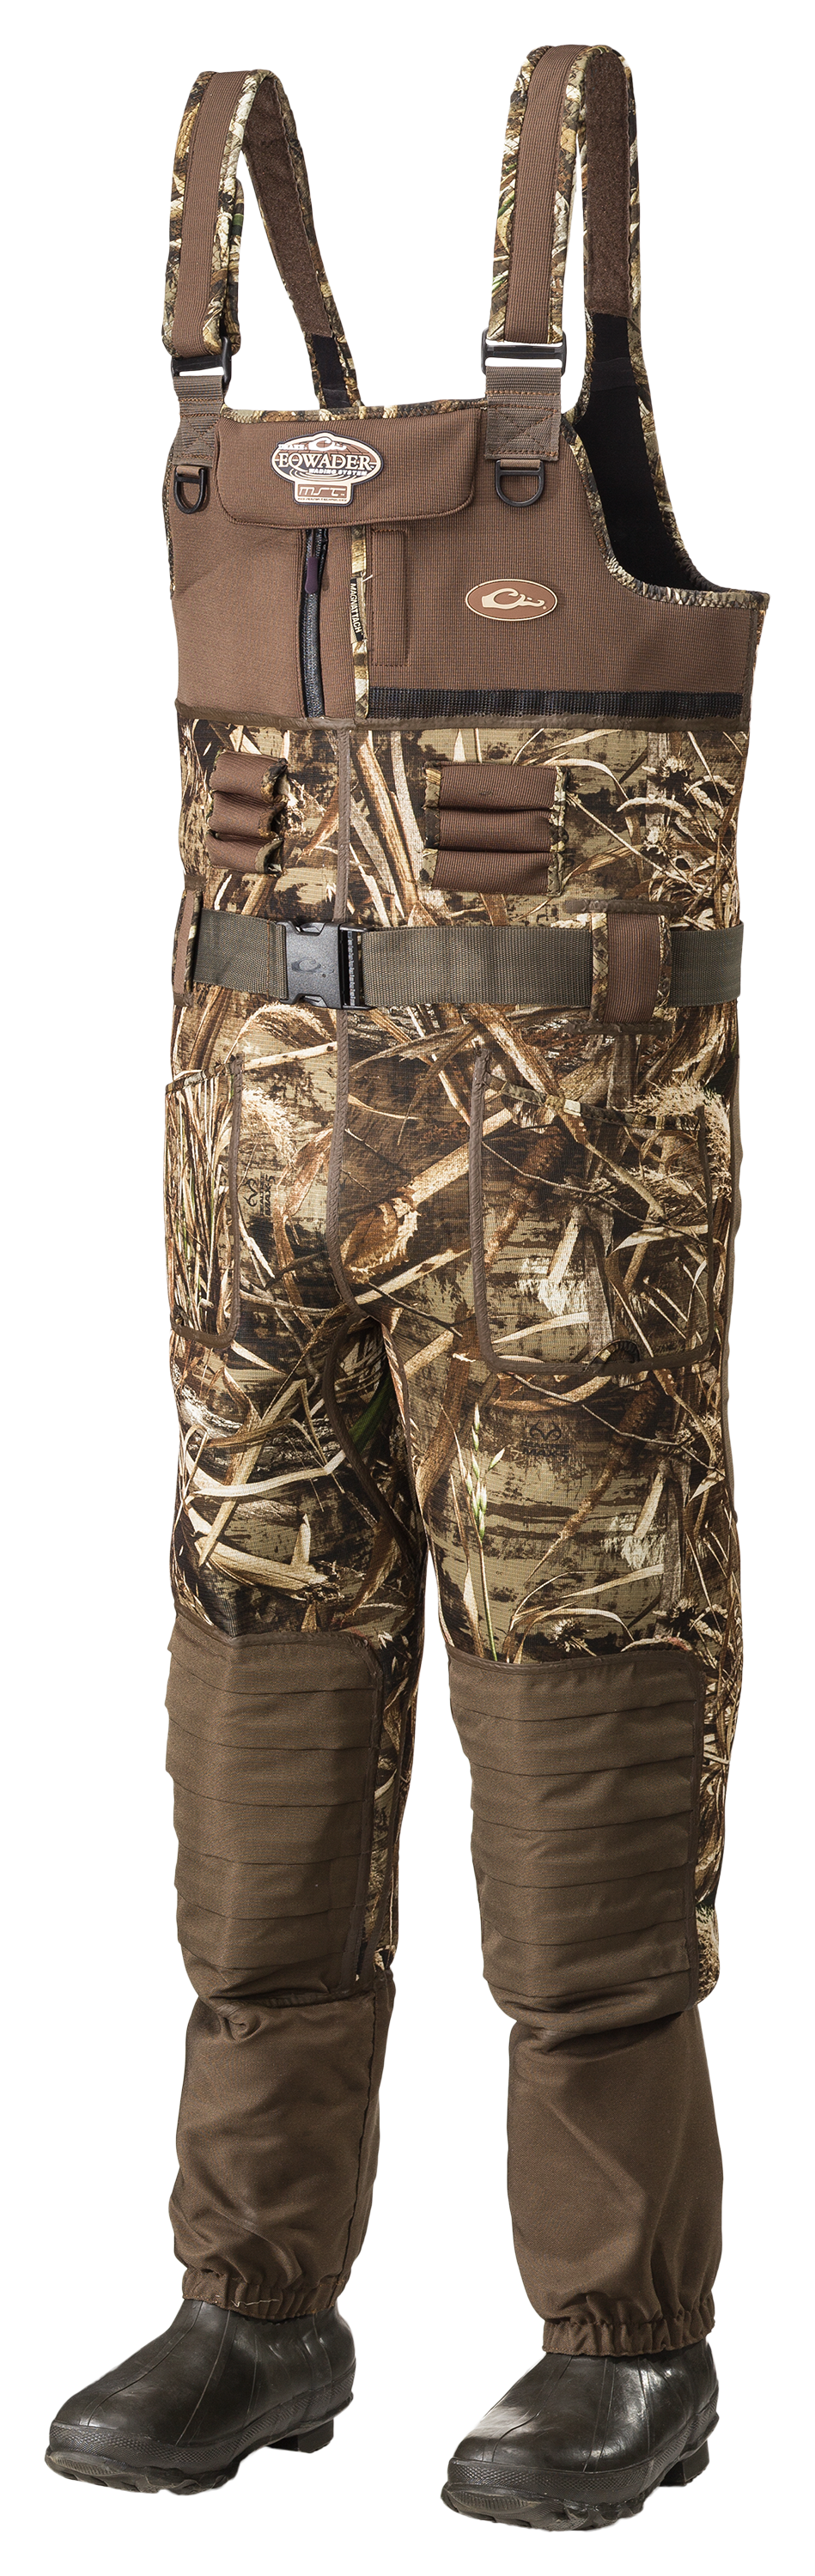 Drake Waterfowl Systems MST Eqwader 2.0 Insulated Bootfoot Wading ...